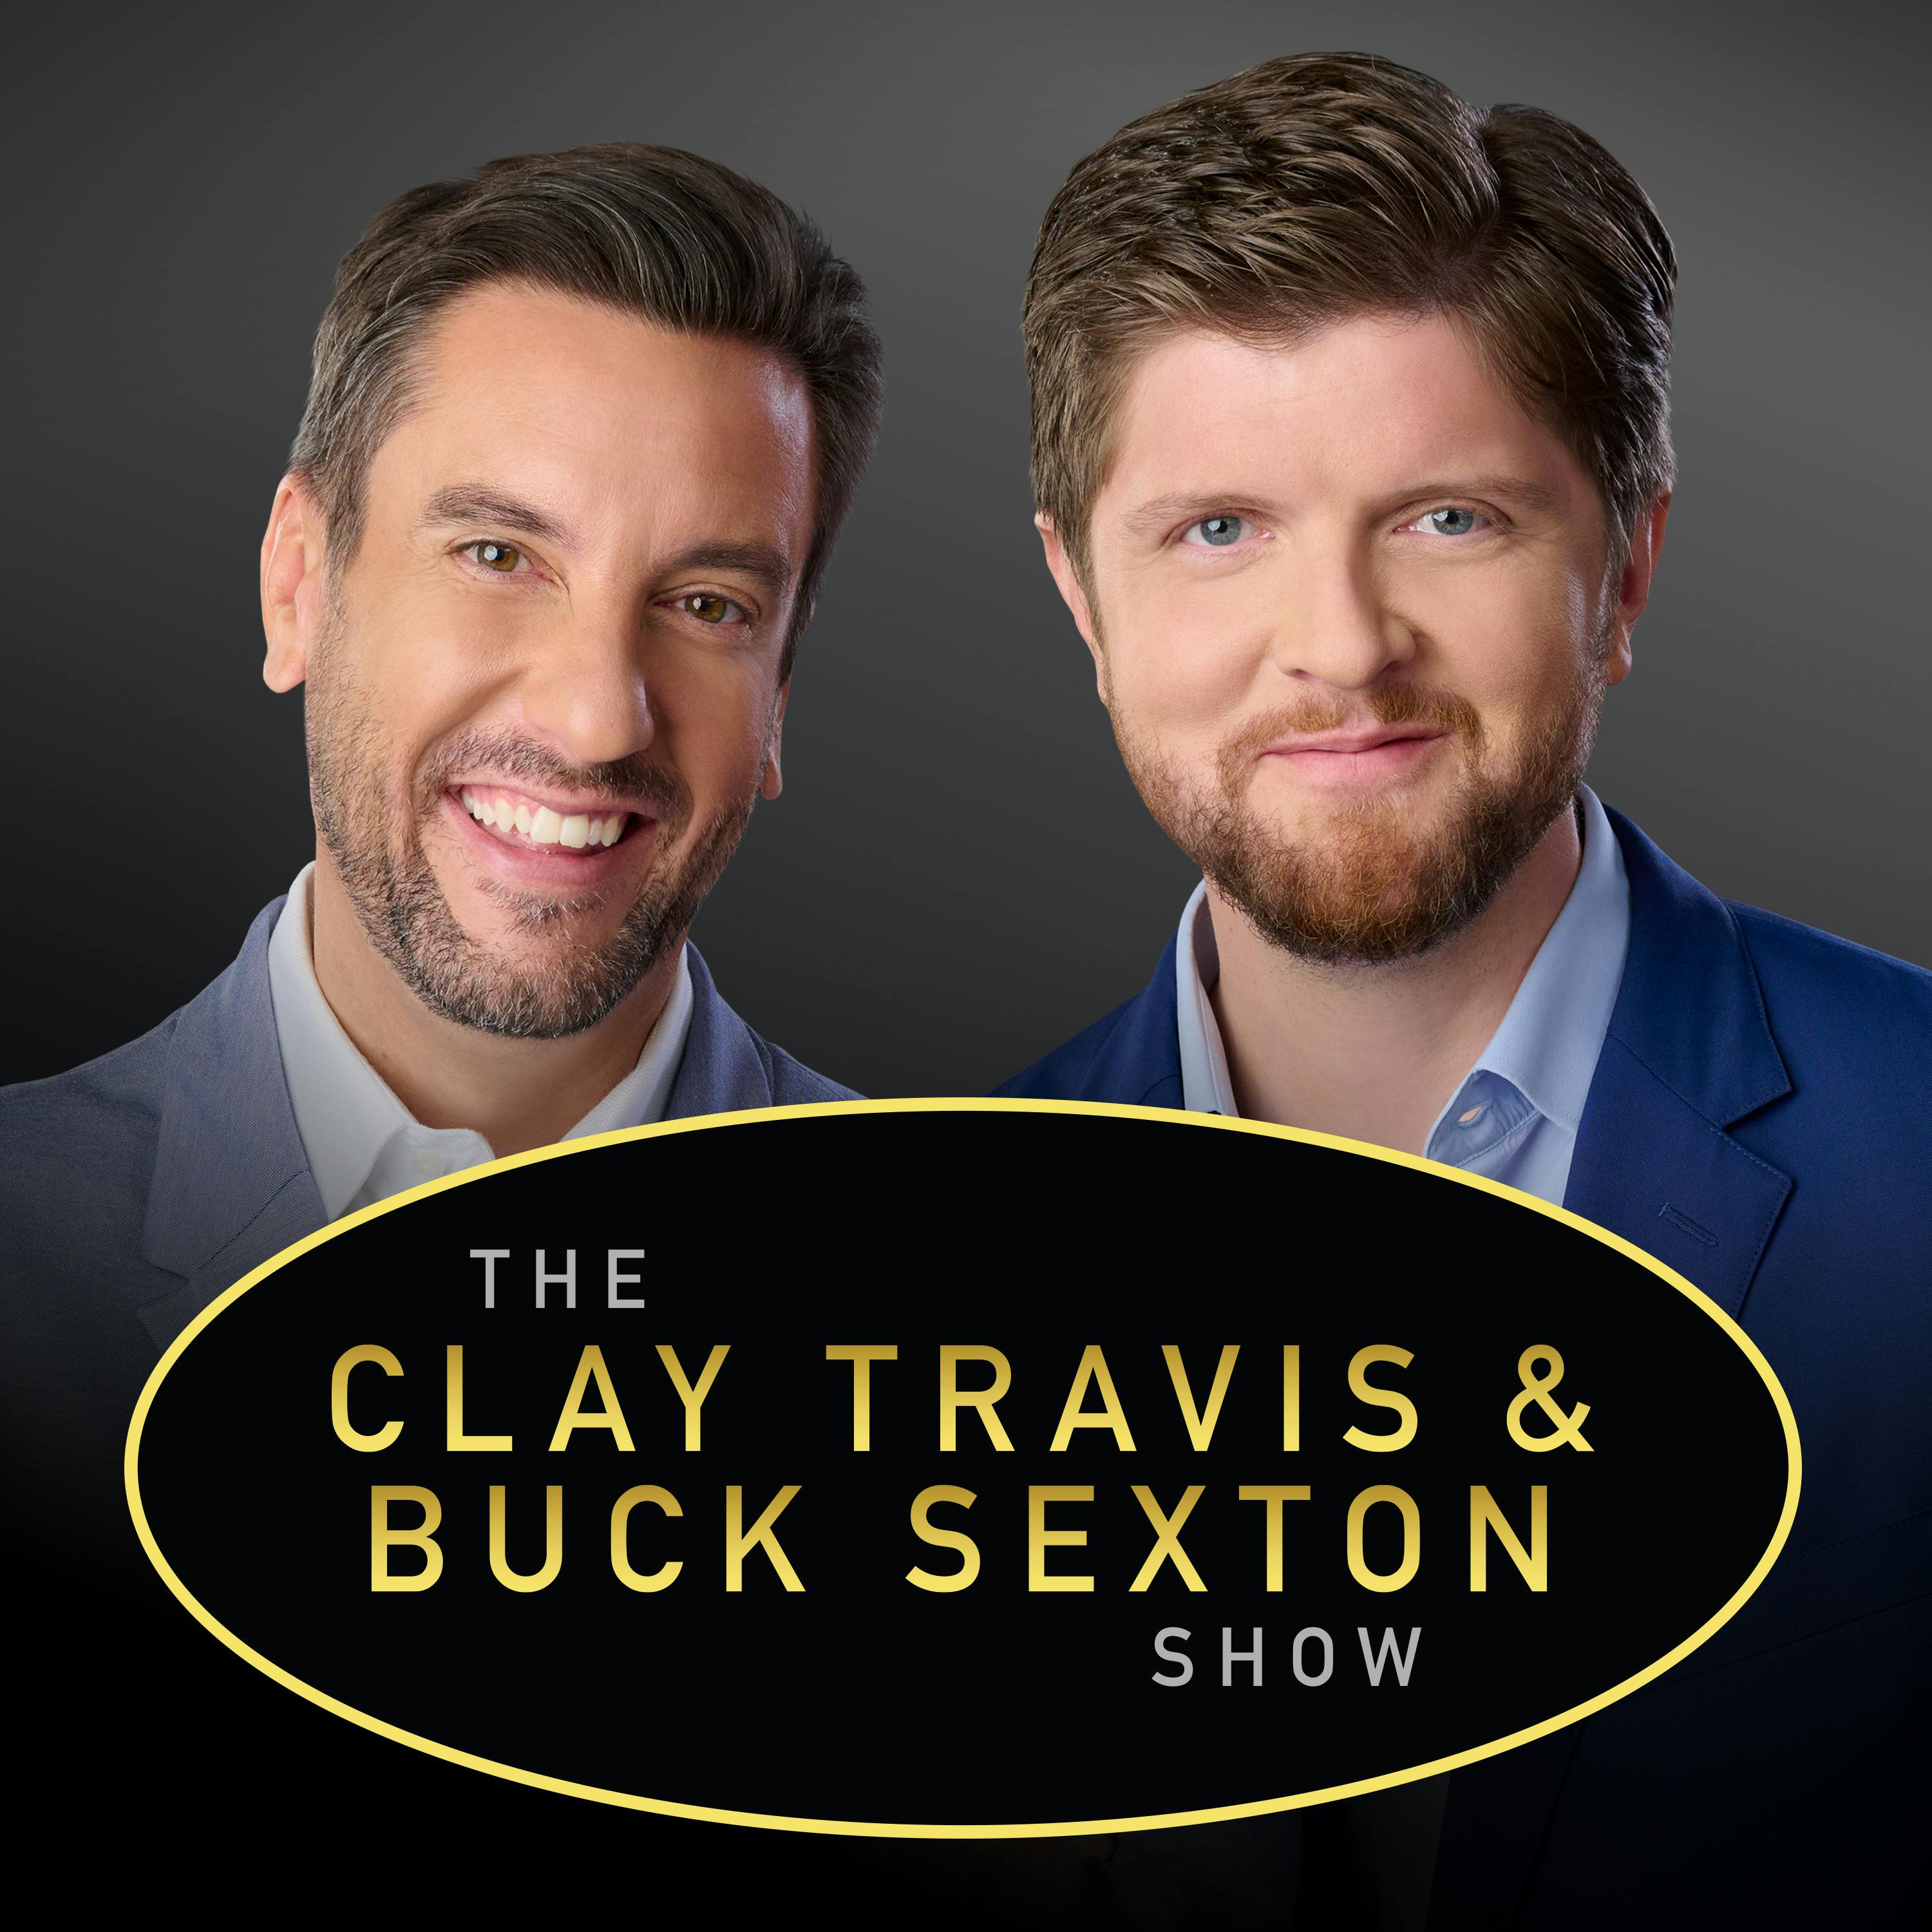 Clay Travis and Buck Sexton Show H1 – Dec 3 2021